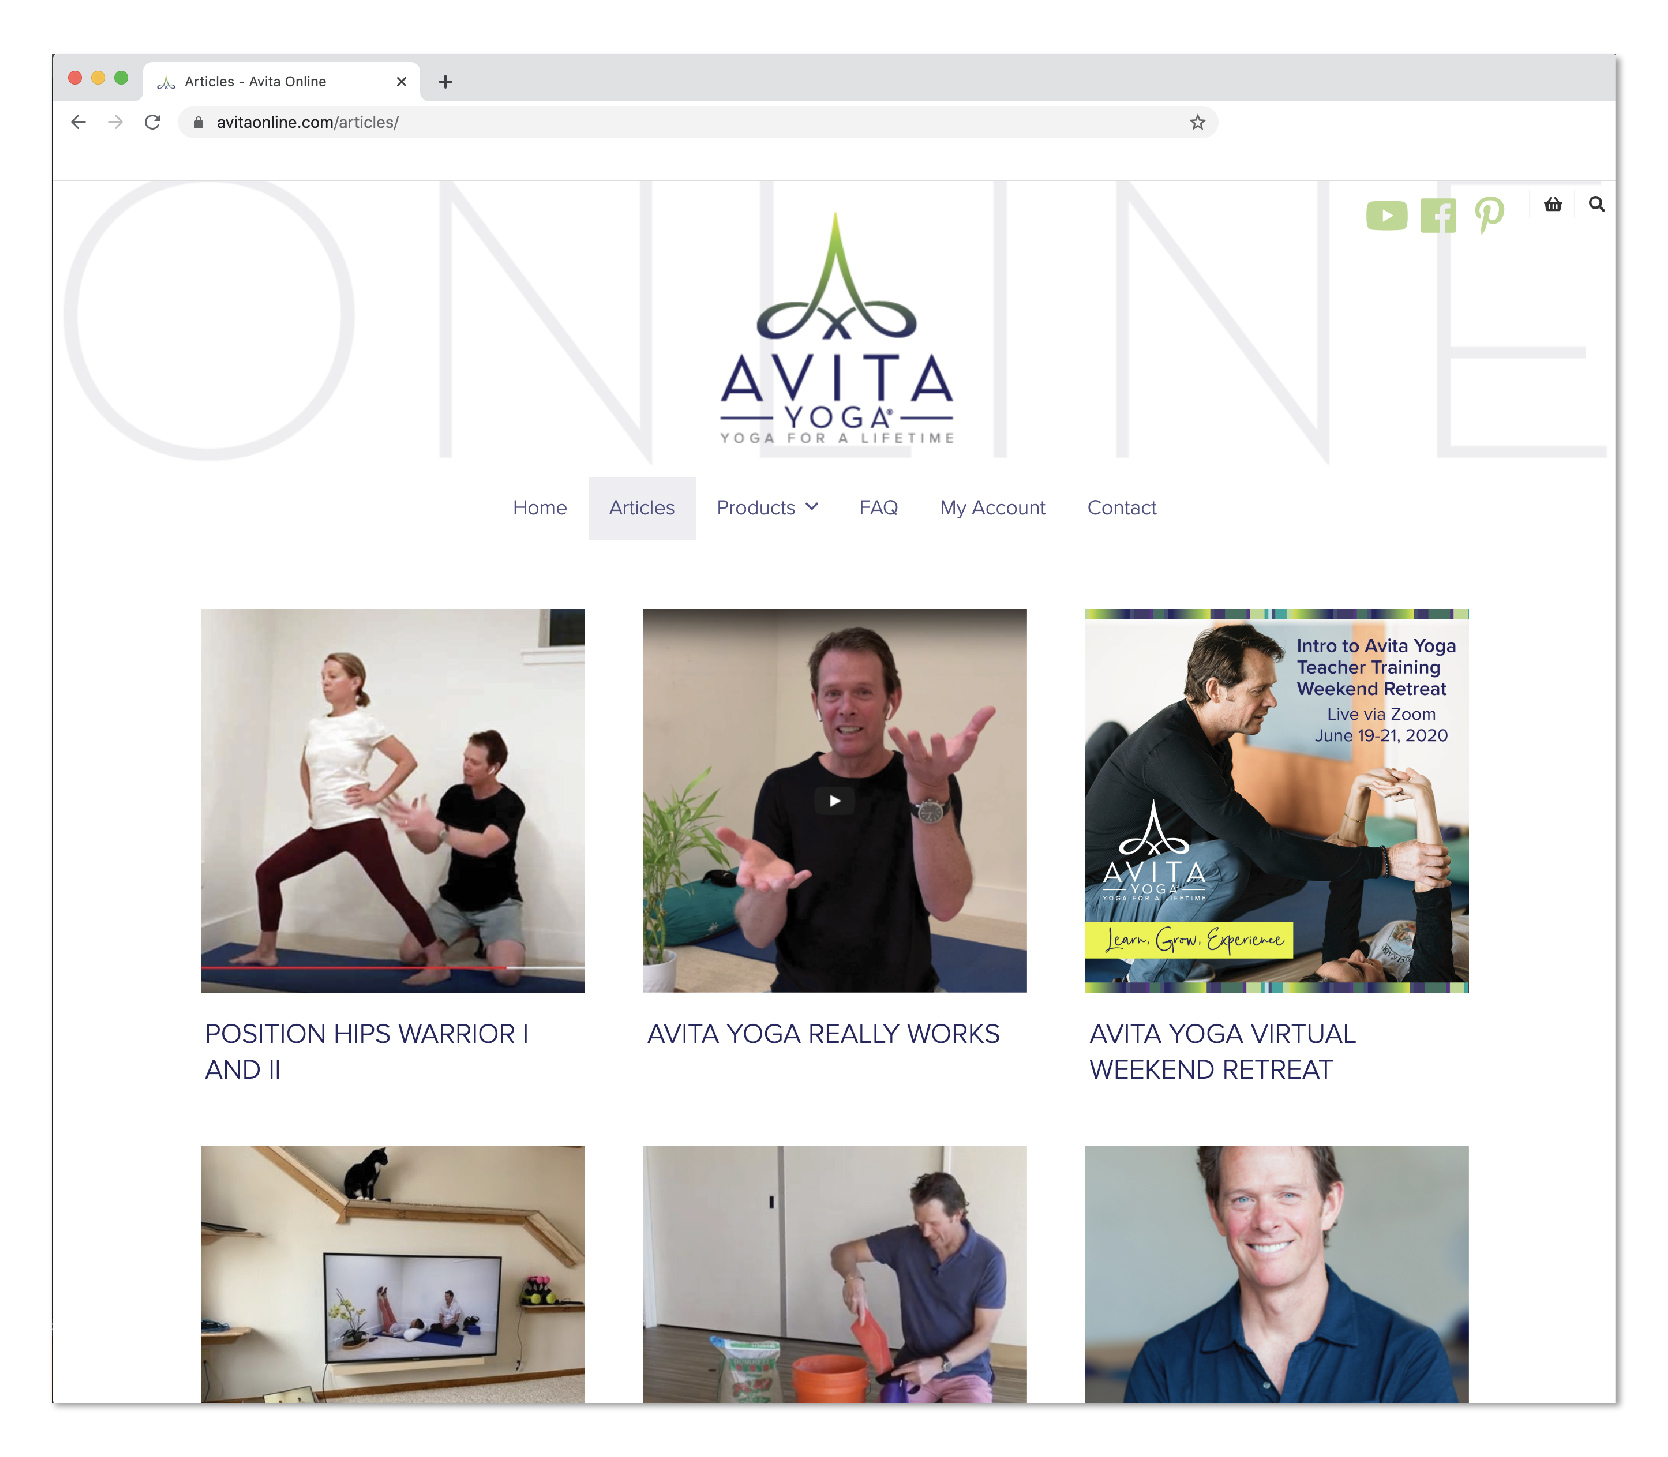 Build your website traffic with high quality blogs and videos great to bring in new business on your online ecommerce store from teh portfolio of DesignInk Digital with Avita Yoga Online